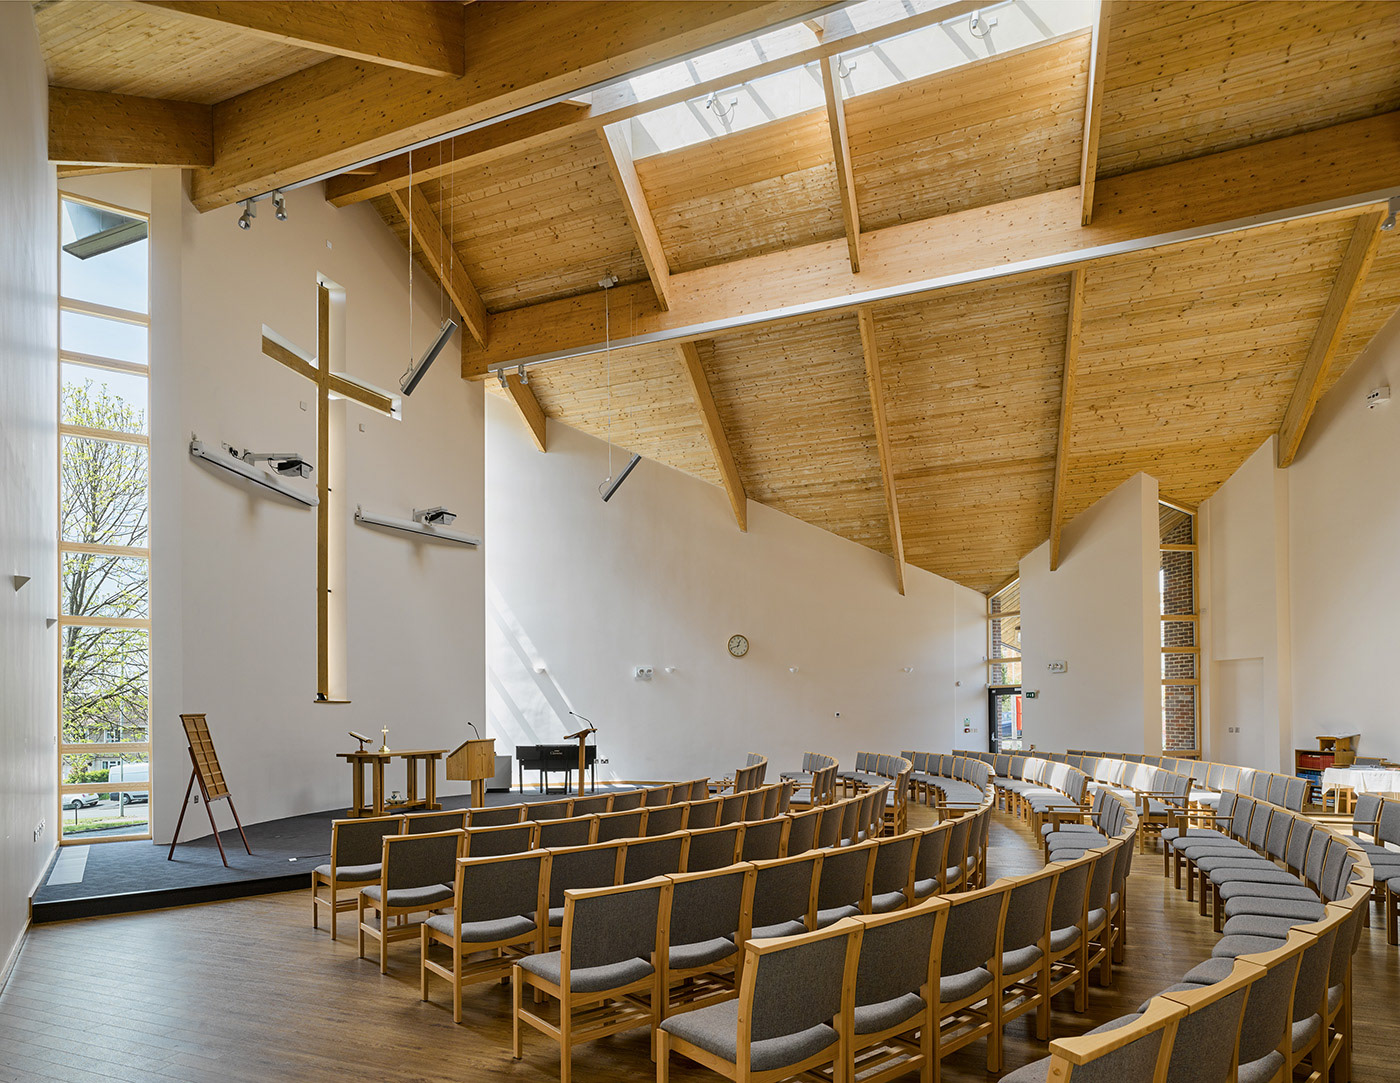 Pitched roof church TIMBER Vault brick oak Flint hertfordshire roof light Weal-Architects